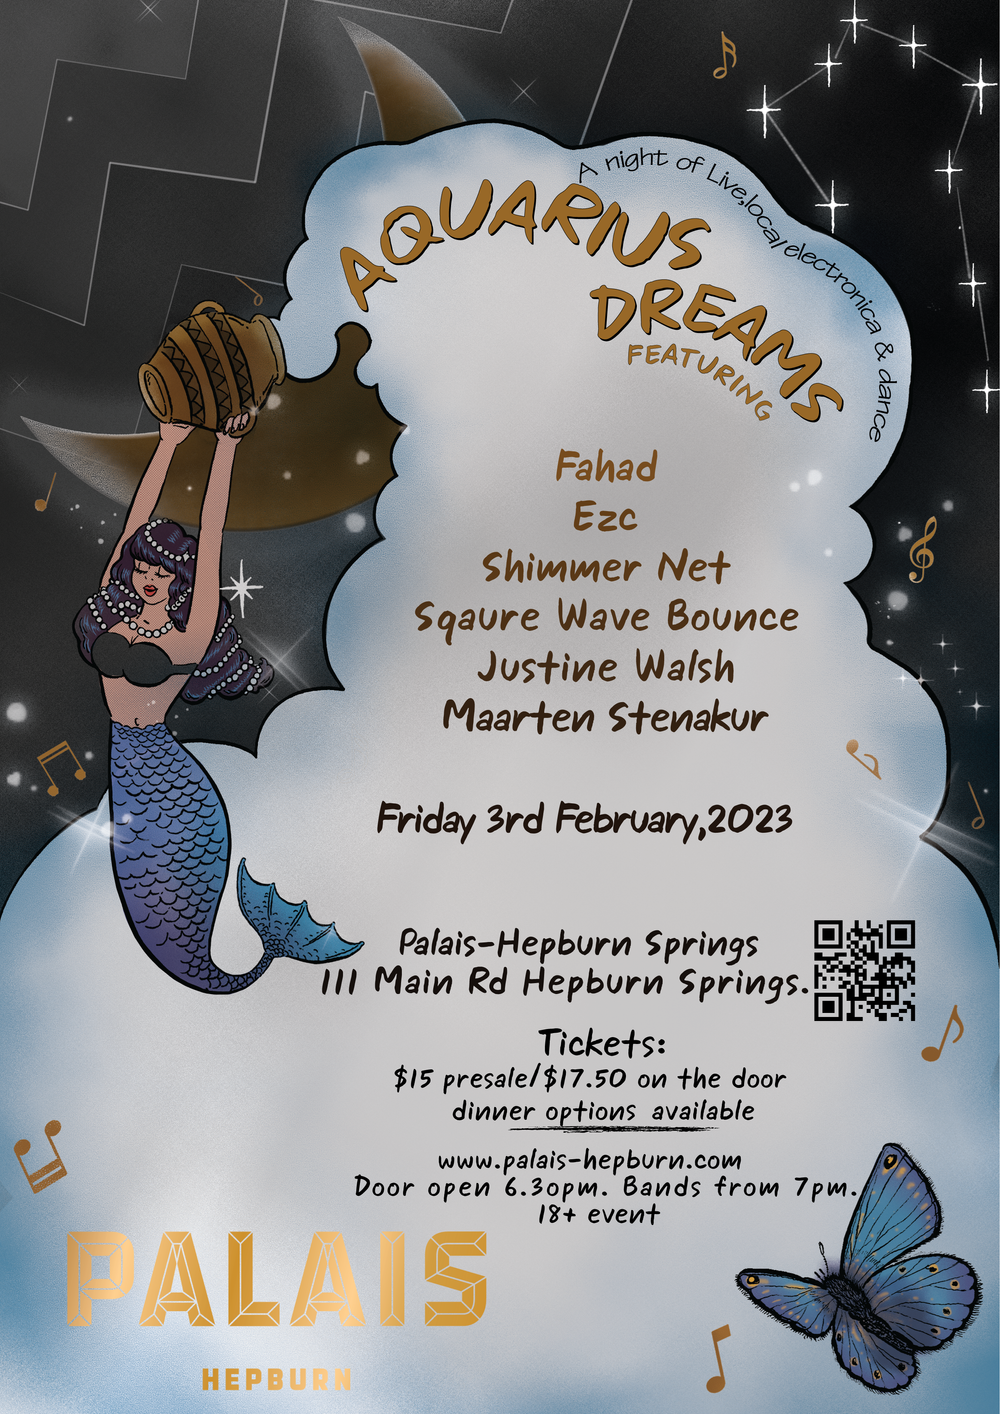 I am performing my music at Aquarius Dreams. Firday 3rd February 2023, Palais Hepburn. Click image for link to Eventbrite tickets.